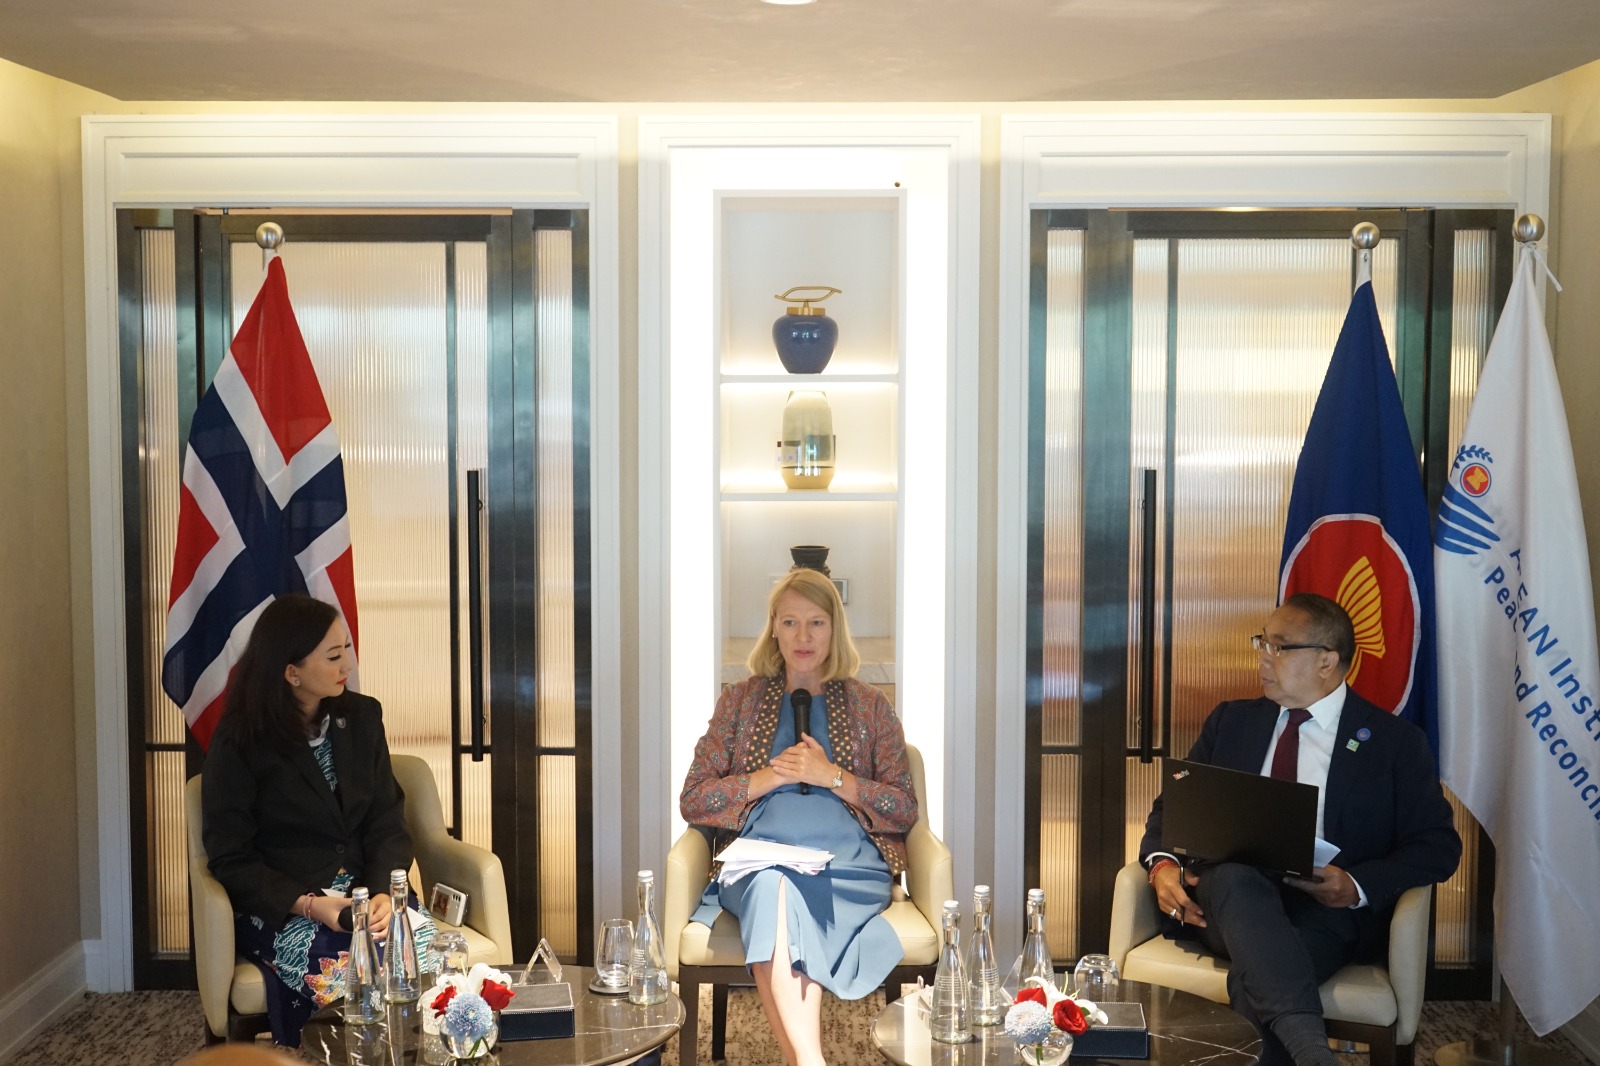 Stakeholder Discussion on Women, Peace and Security (WPS) with the Norwegian Minister of Foreign Affairs